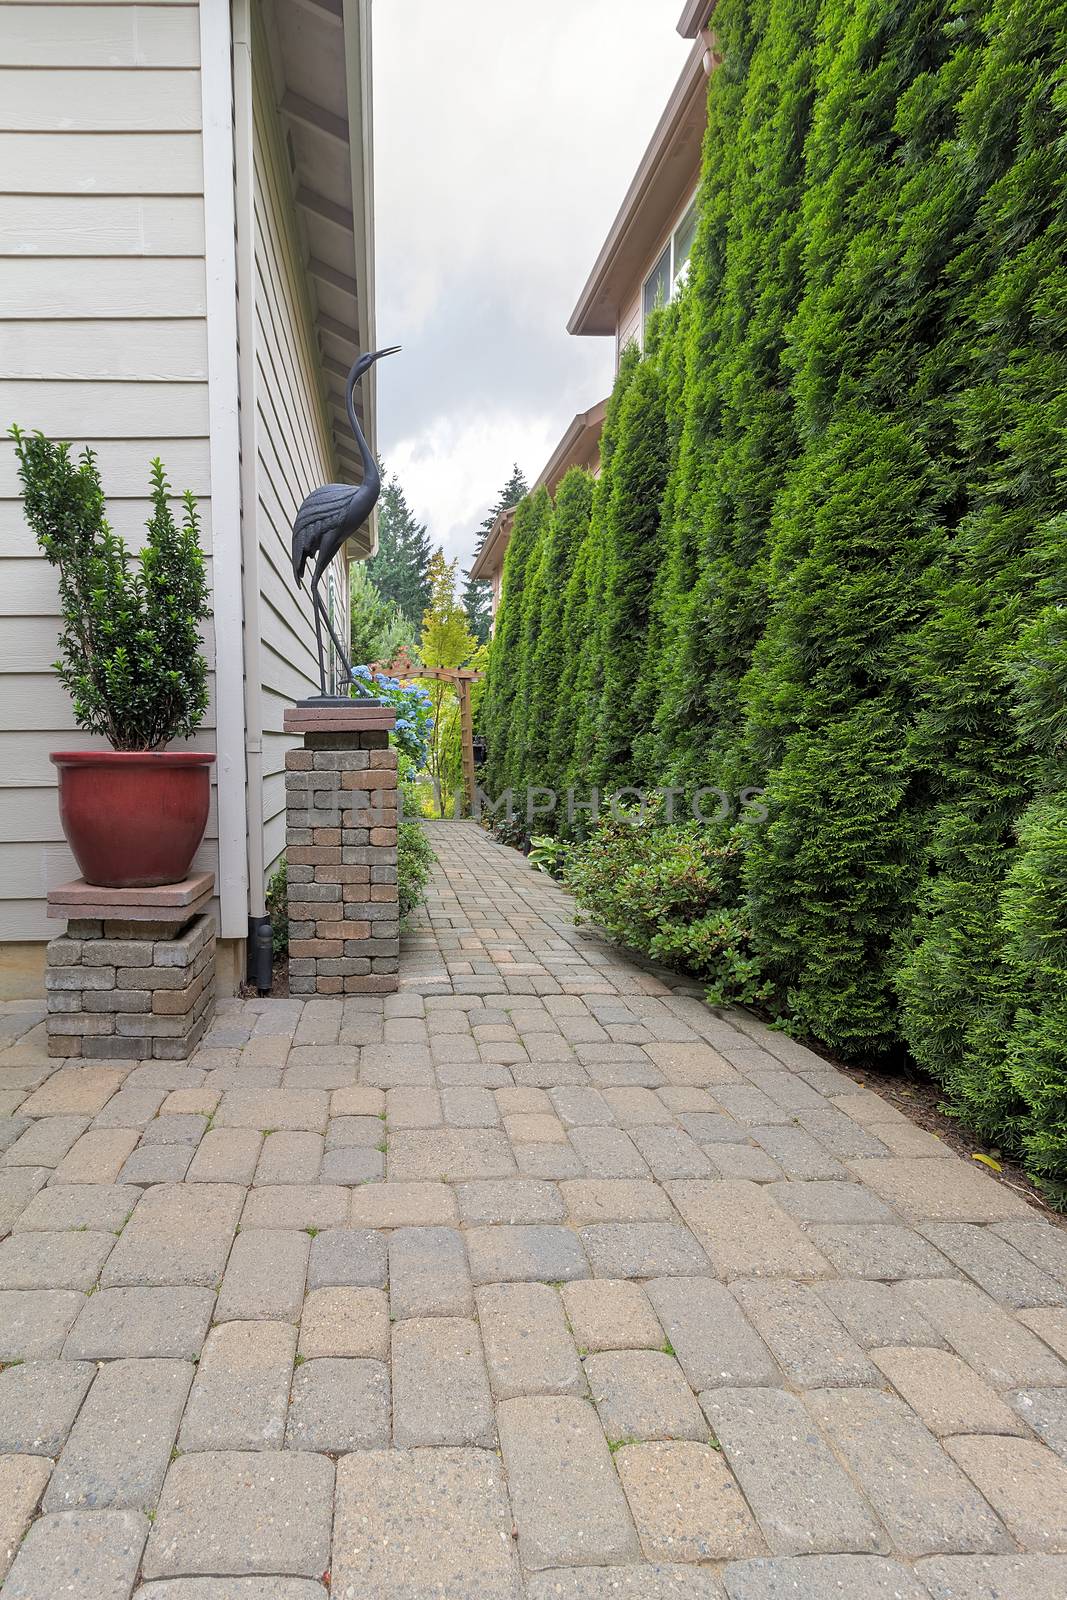 Garden Patio and Brick Path Hardscape by jpldesigns